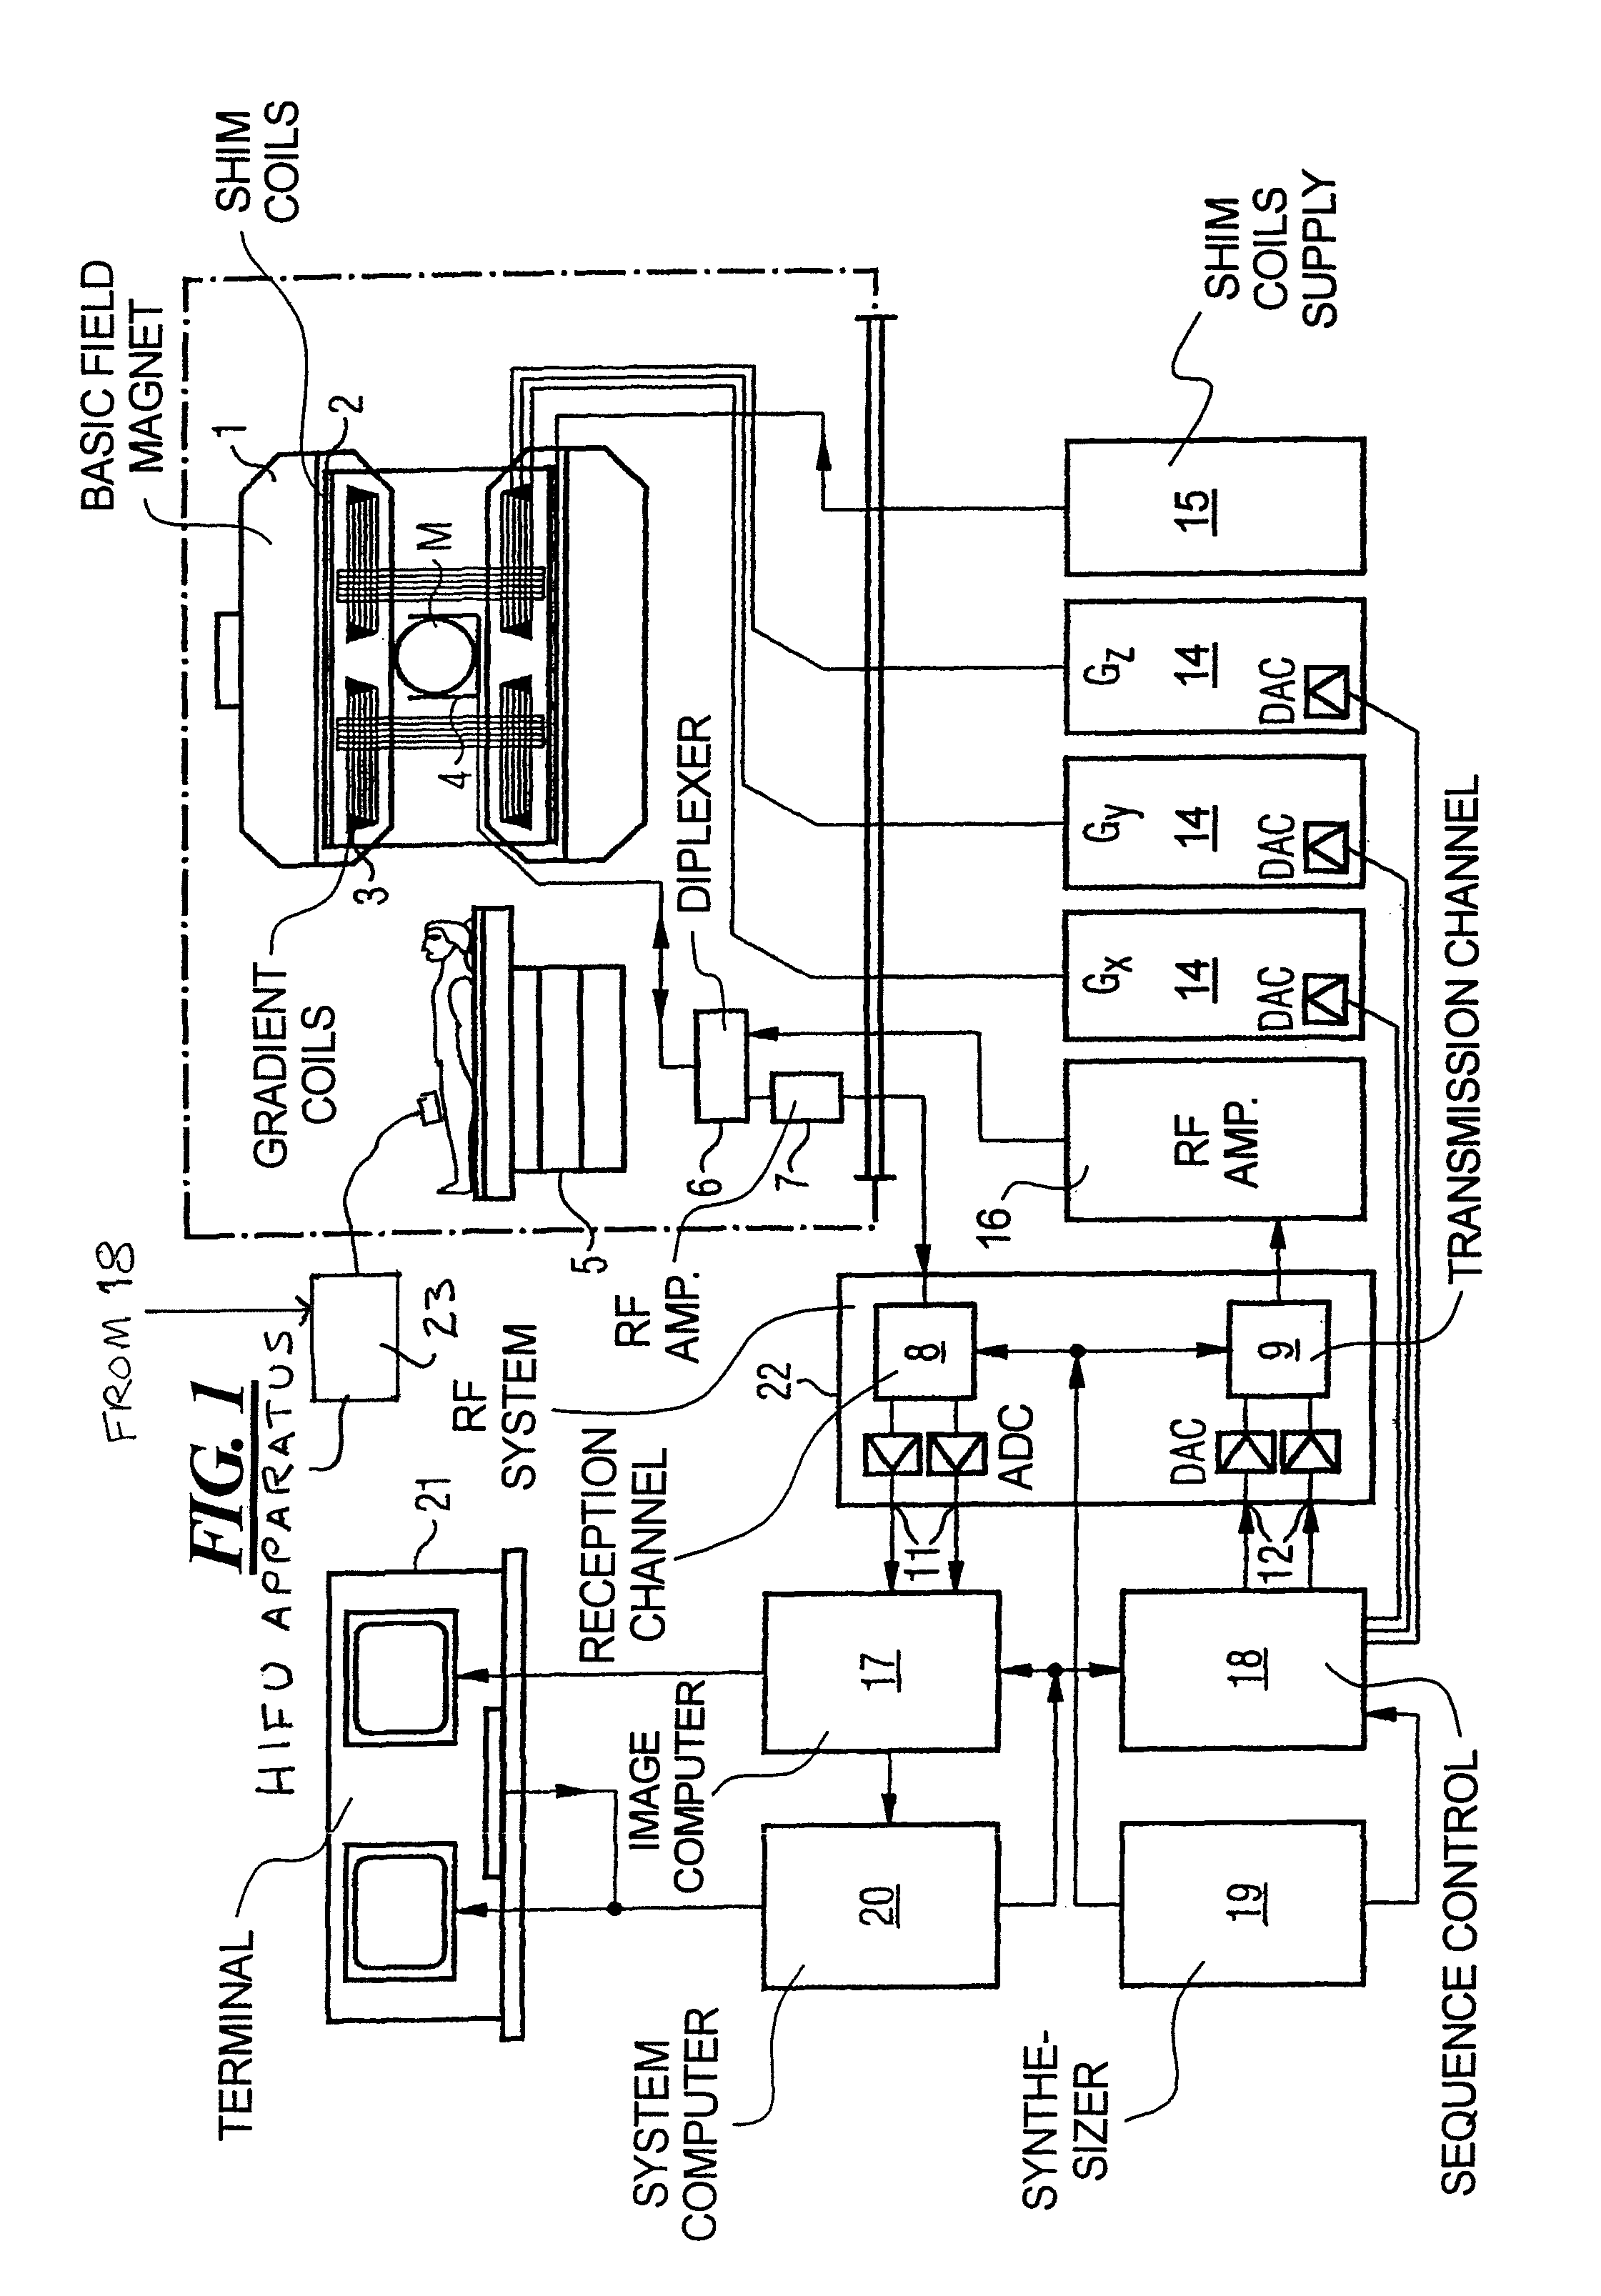 Method and apparatus for magnetic resonance guided high intensity focused ultrasound focusing under simultaneous temperature monitoring